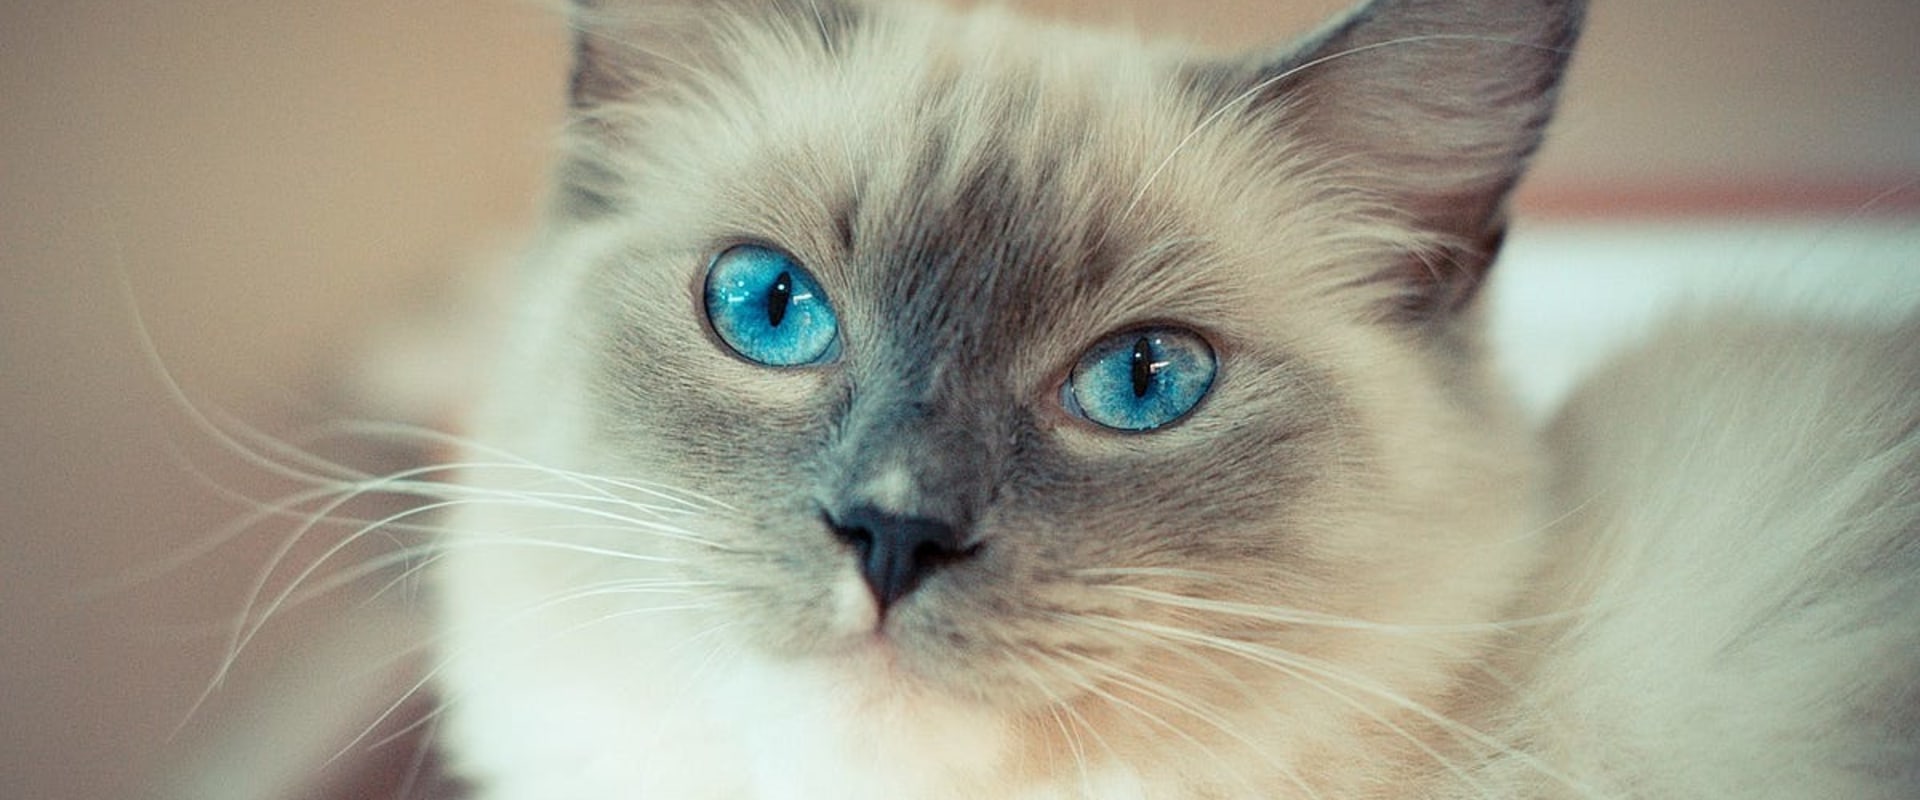 Everything You Need to Know About Ragdoll Cats